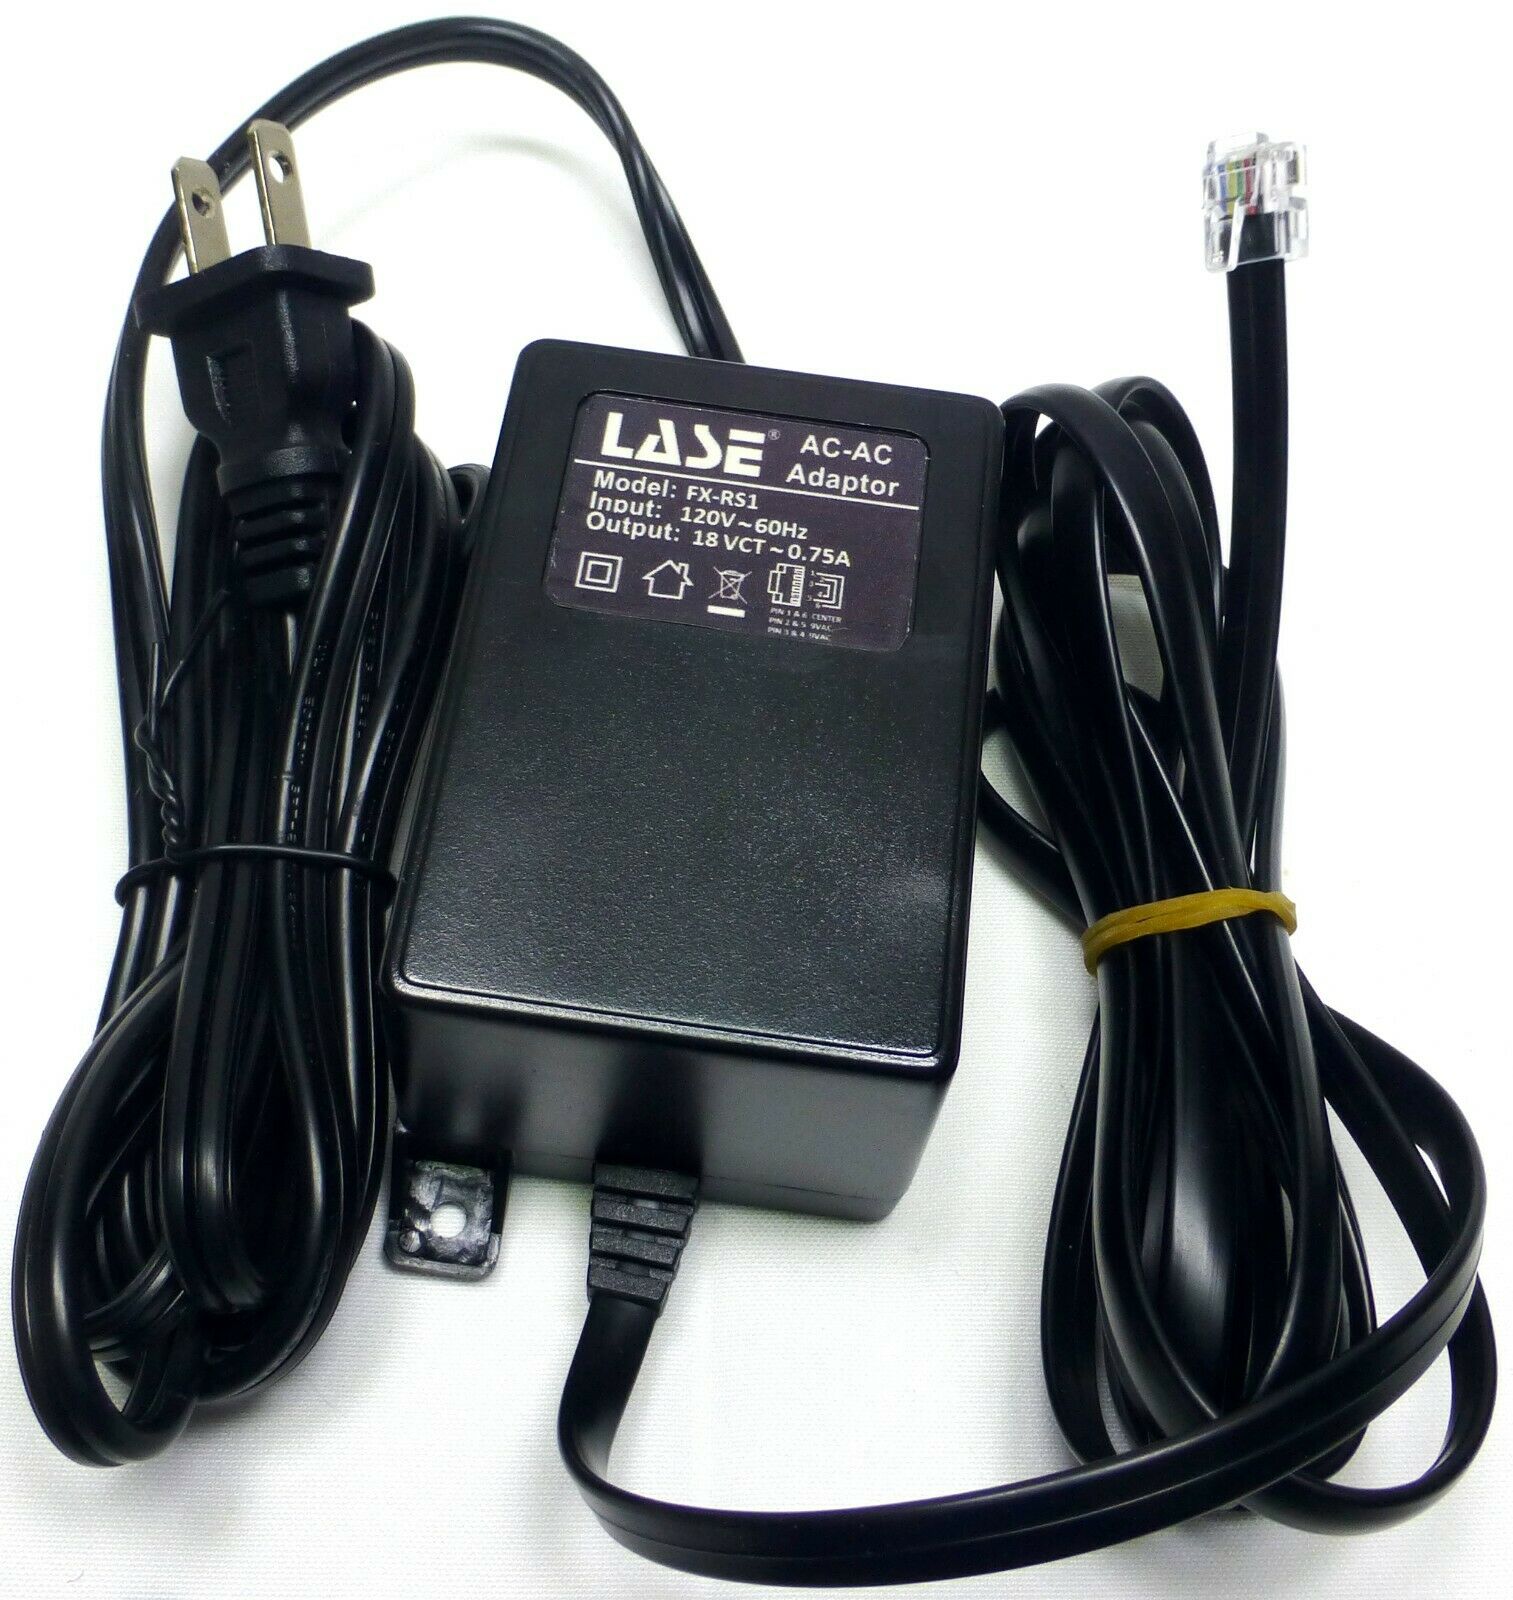 Replacement Power Supply Rane Rs-1 For Rane Products Ac22b,mp24z,ge130 & More...